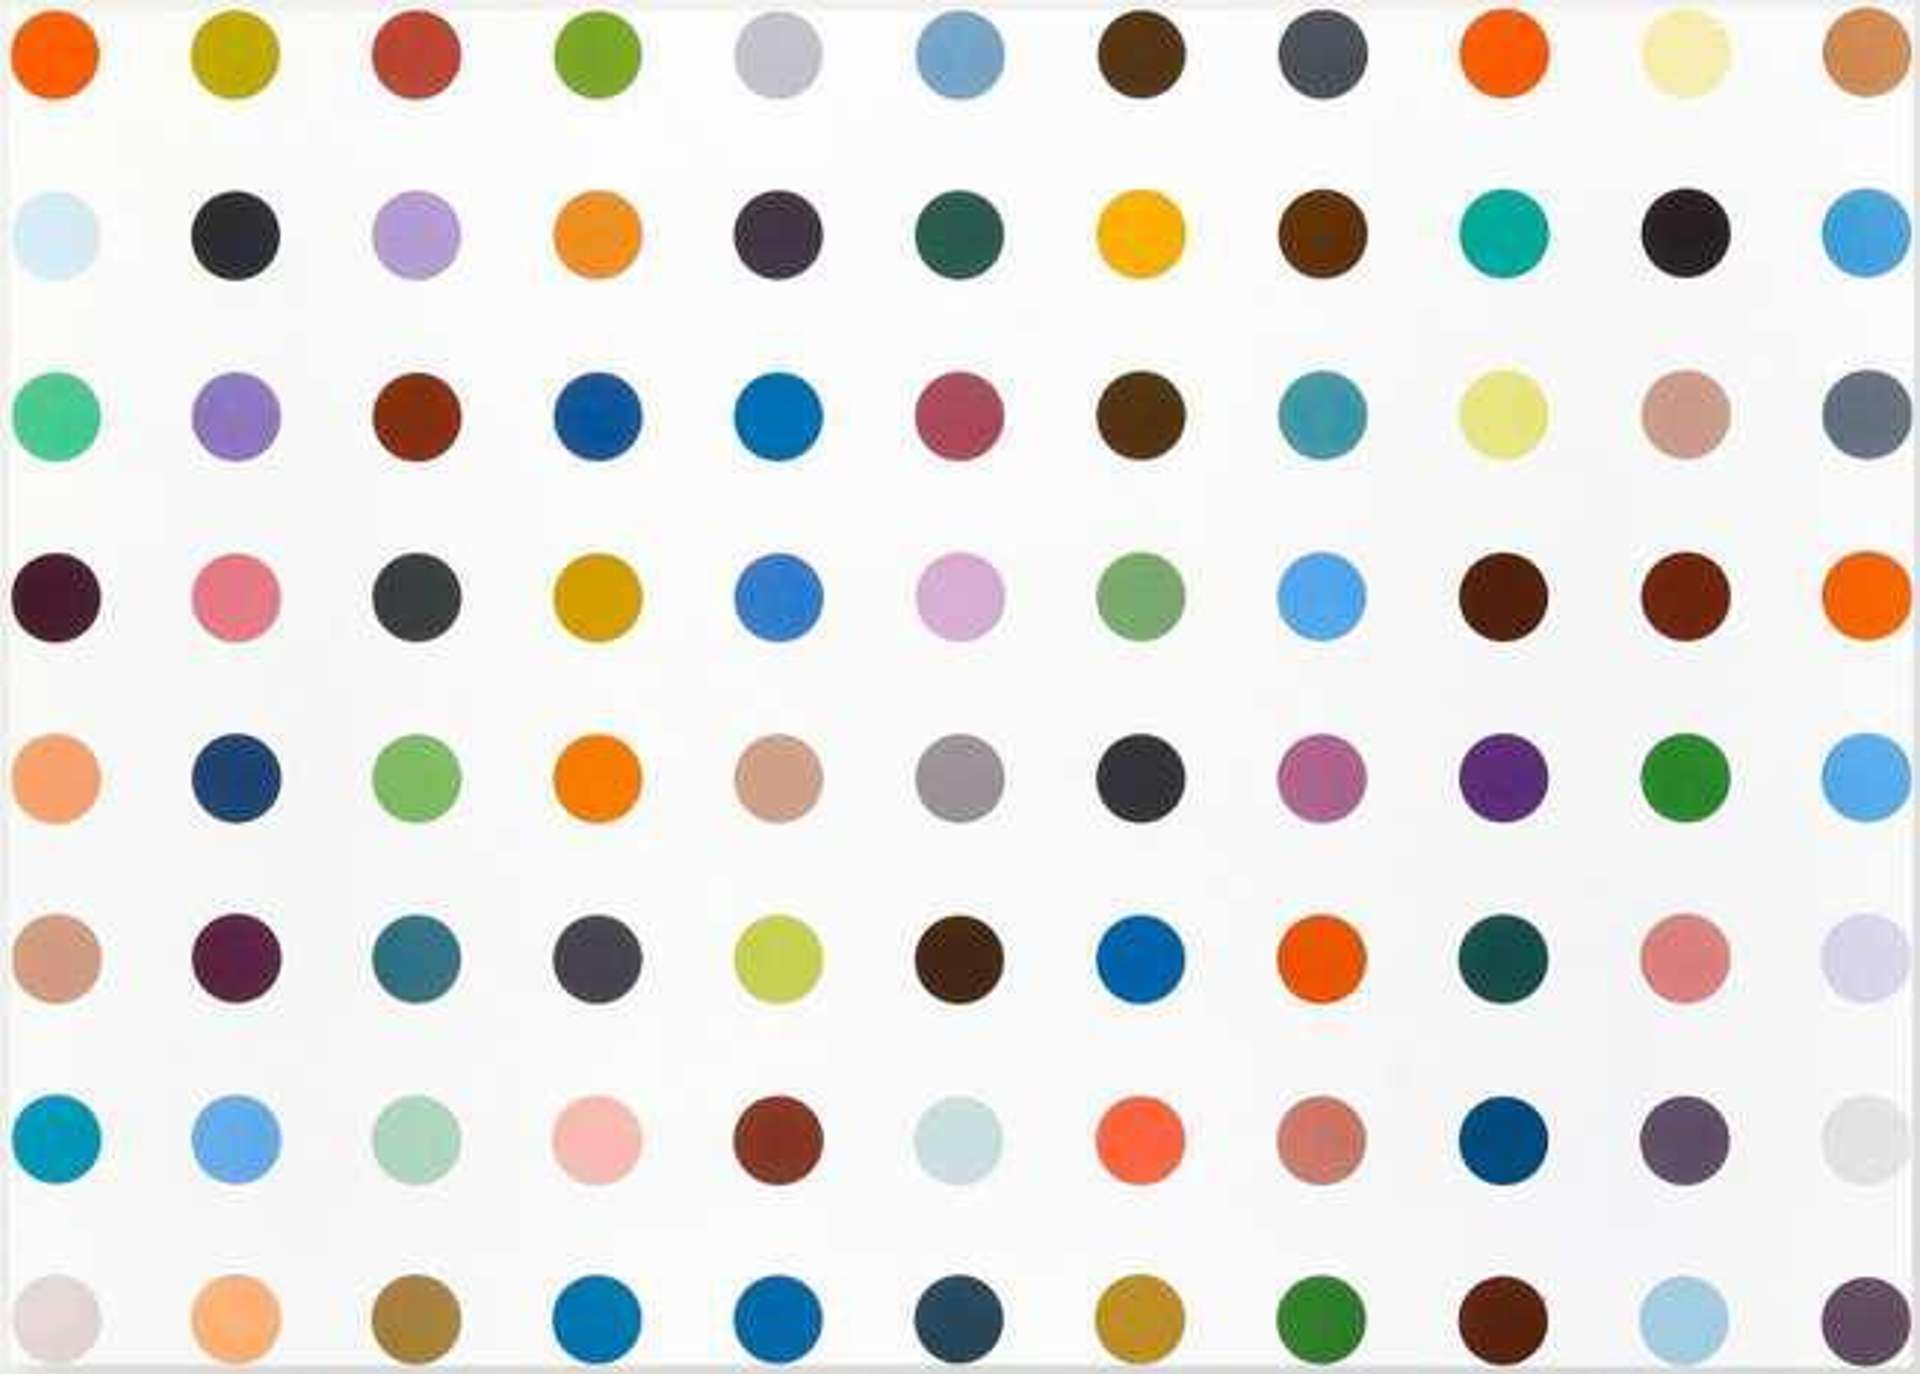 Postcard From Nucleohistone - Unsigned Print by Damien Hirst 2012 - MyArtBroker